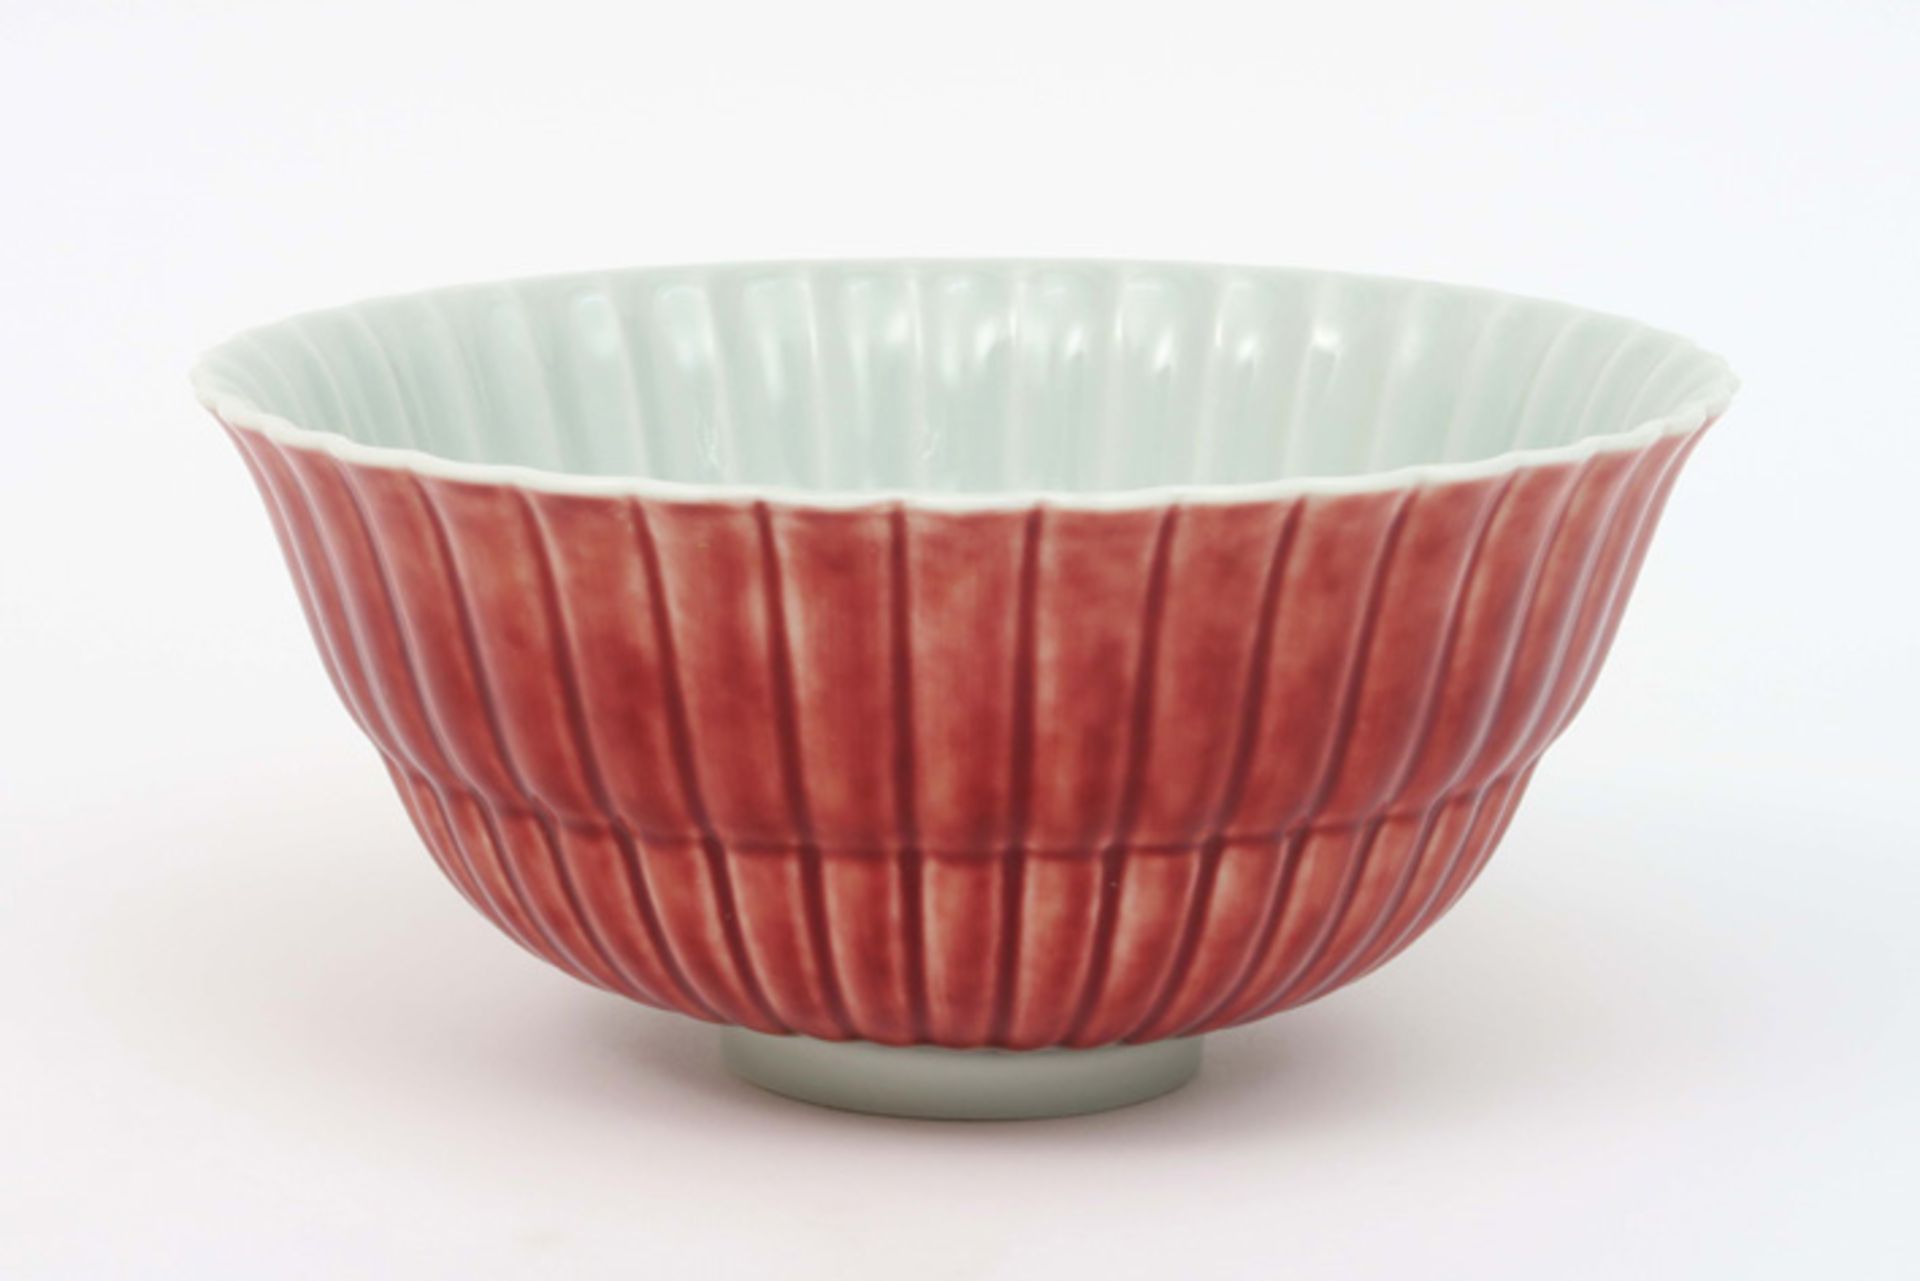 scalloped lotusflower shaped bowl in marked Royal Kopenhagen porcelain with embossed ribs||Bowl in - Image 2 of 5